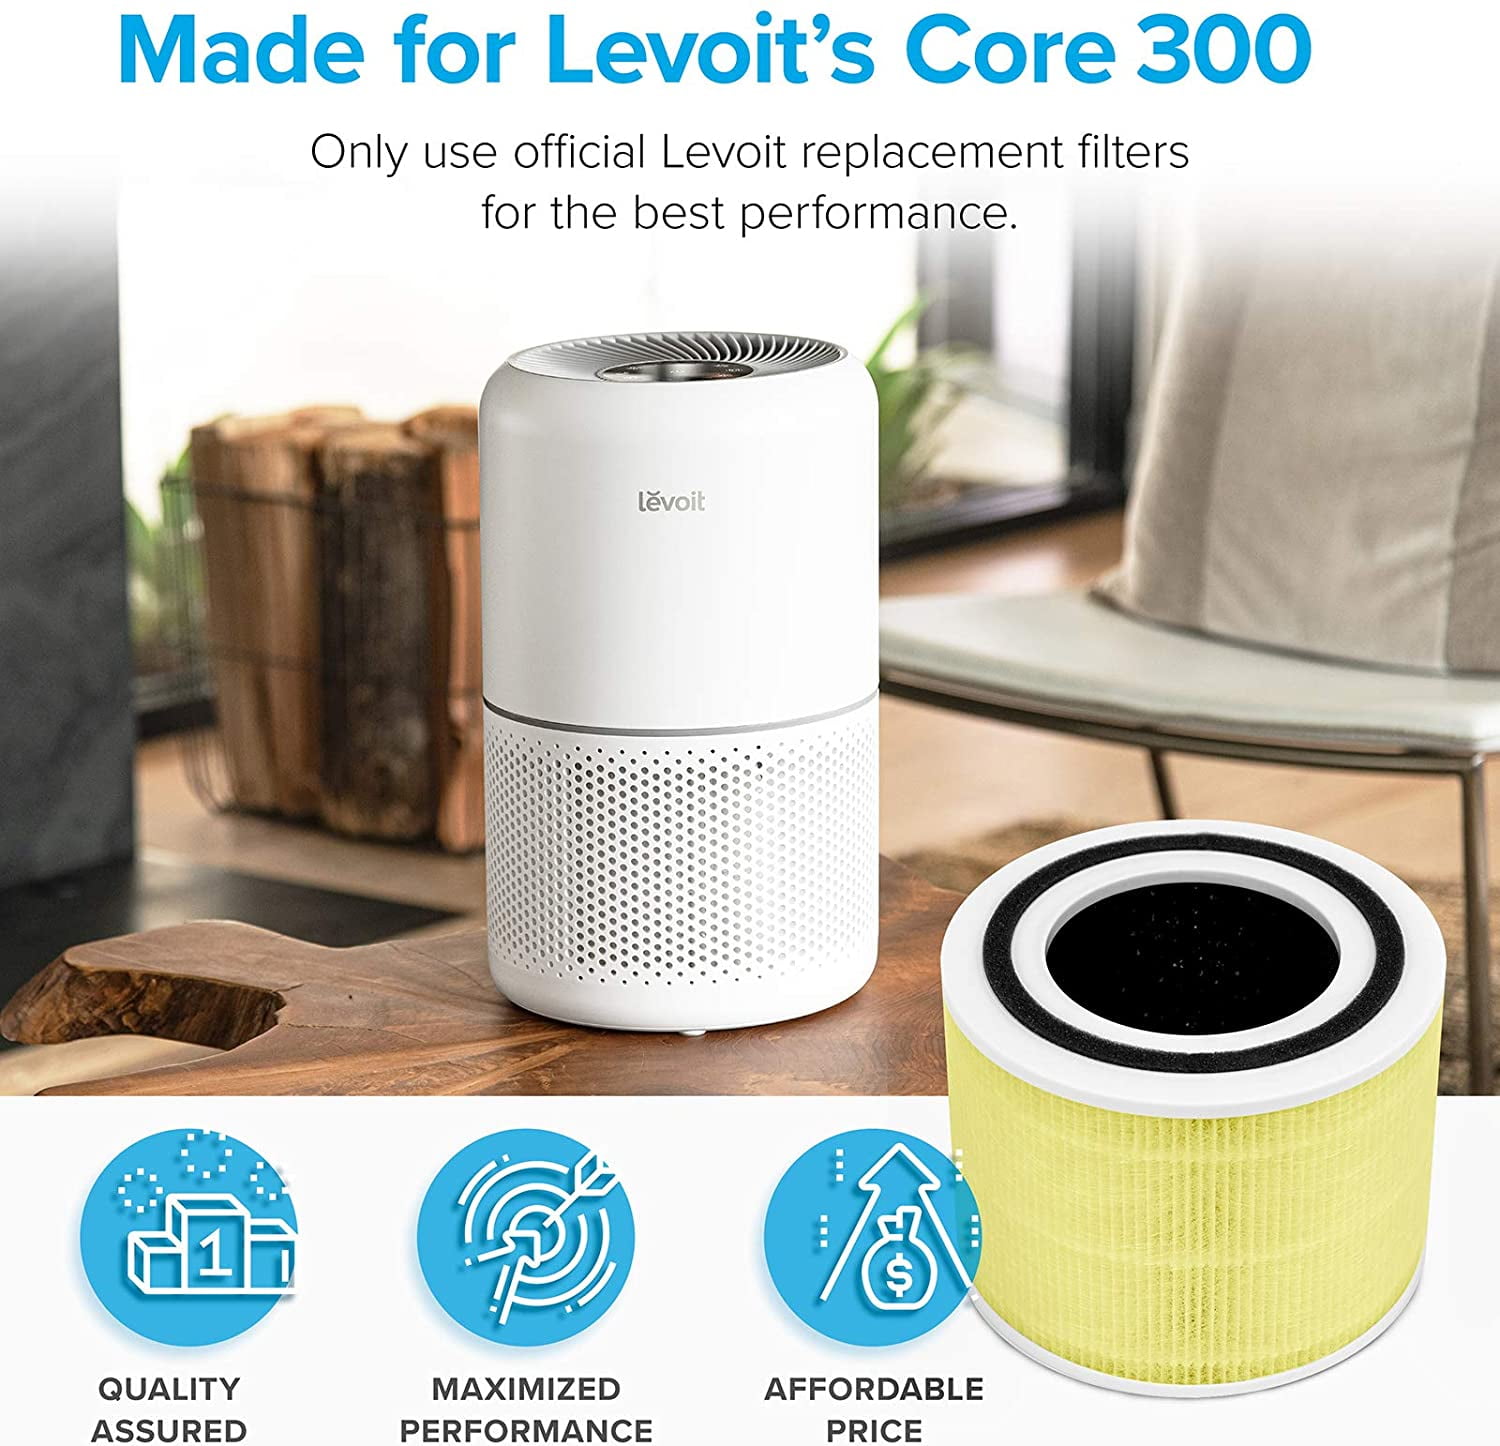 LEVOIT Core 300 Air Purifier Replacement Filter, Core 300-RF (Toxin  Absorber) & LV-H132-RF 2 Pack Replacement, 3-in-1 Nylon Pre, True HEPA